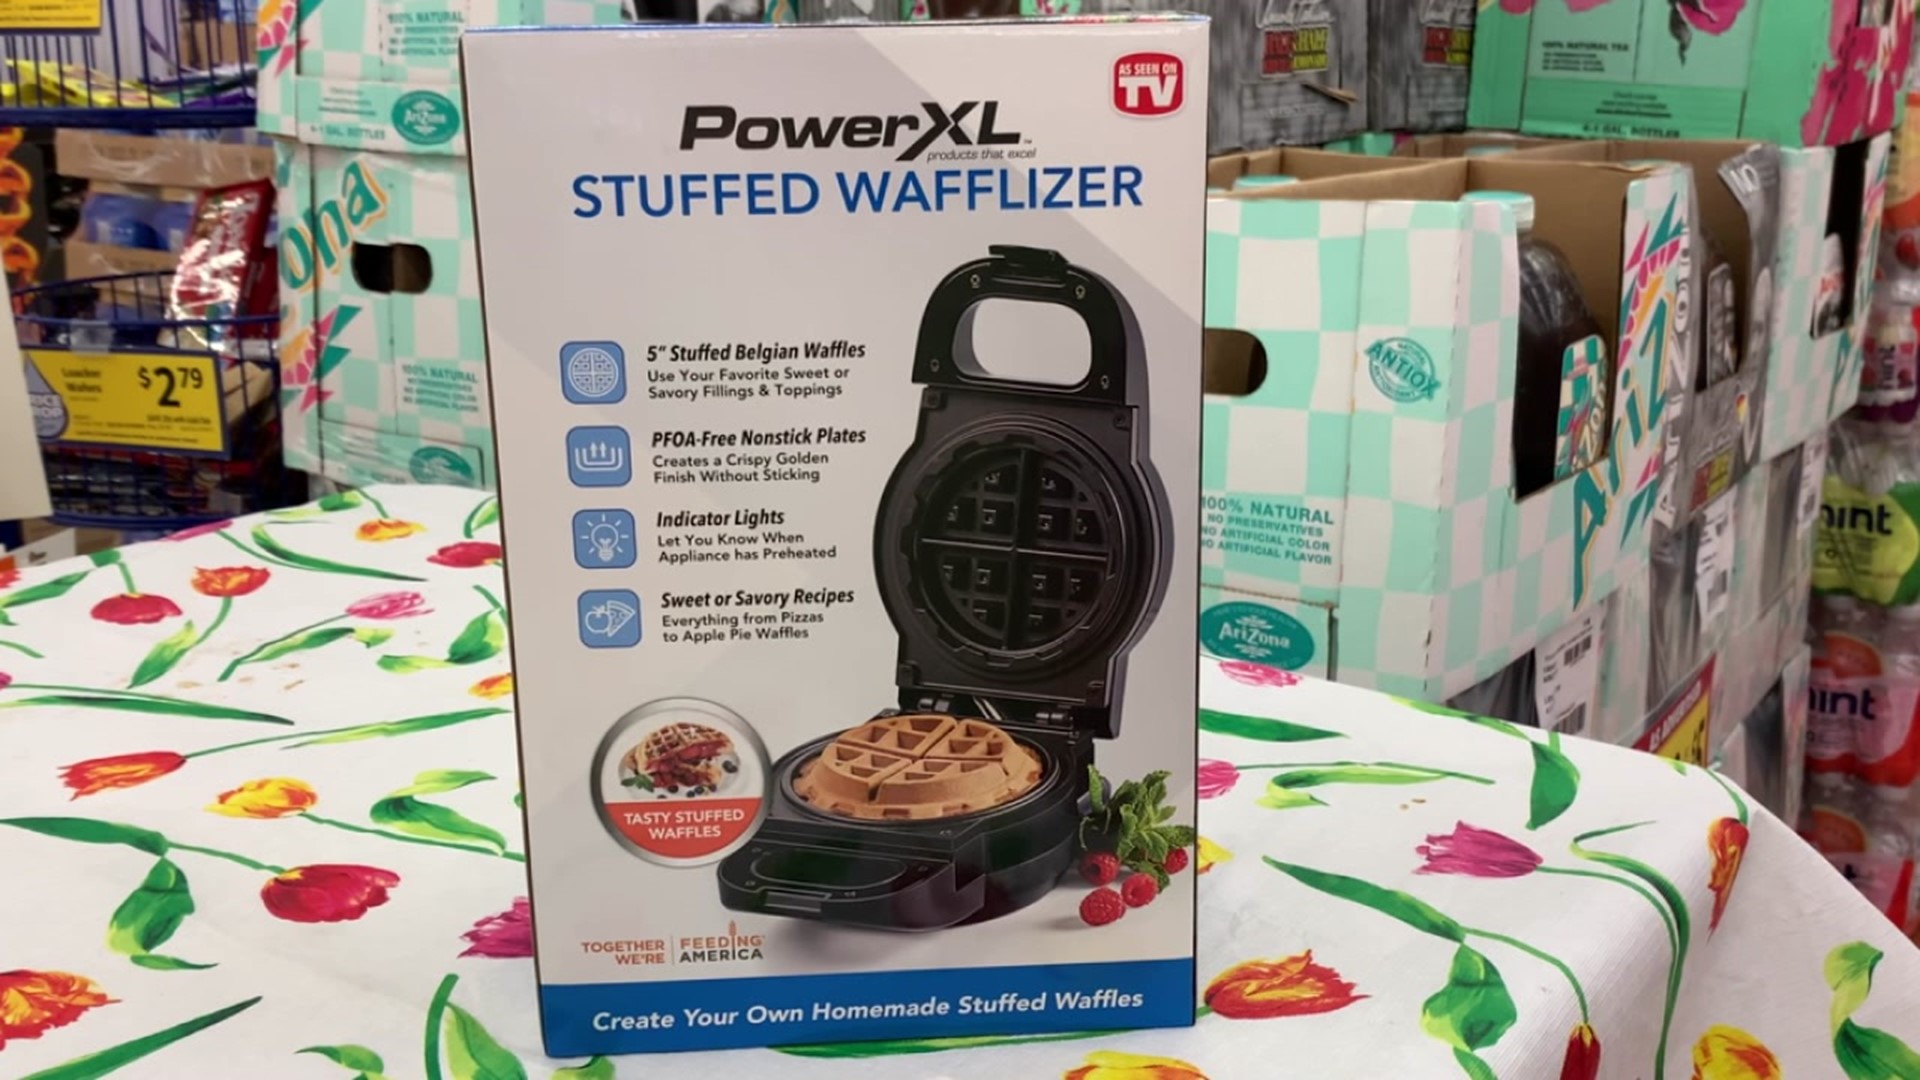 The maker claims this product is the fast and easy way to make sweet or savory stuffed waffles.